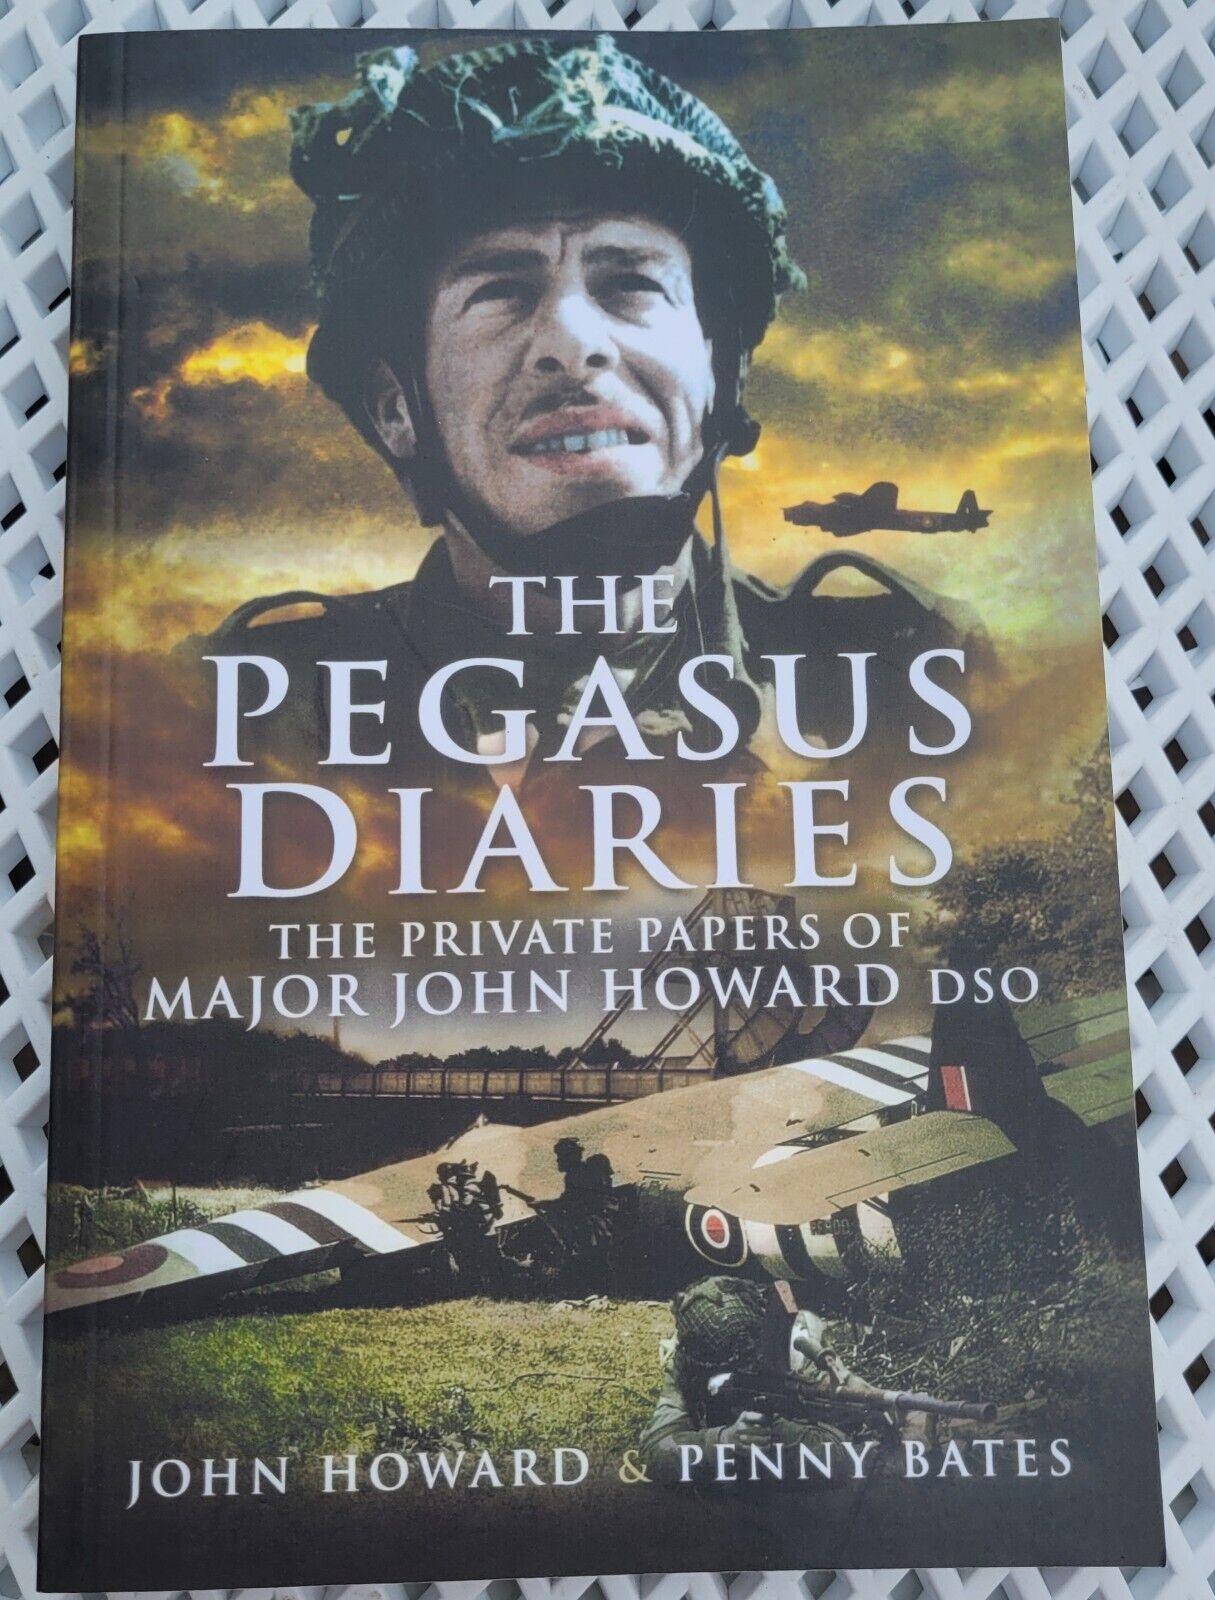 WW2 BOOK: THE PEGASUS DIARIES. THE PRIVATE PAPERS OF MAJOR JOHN HOWARD DSO....